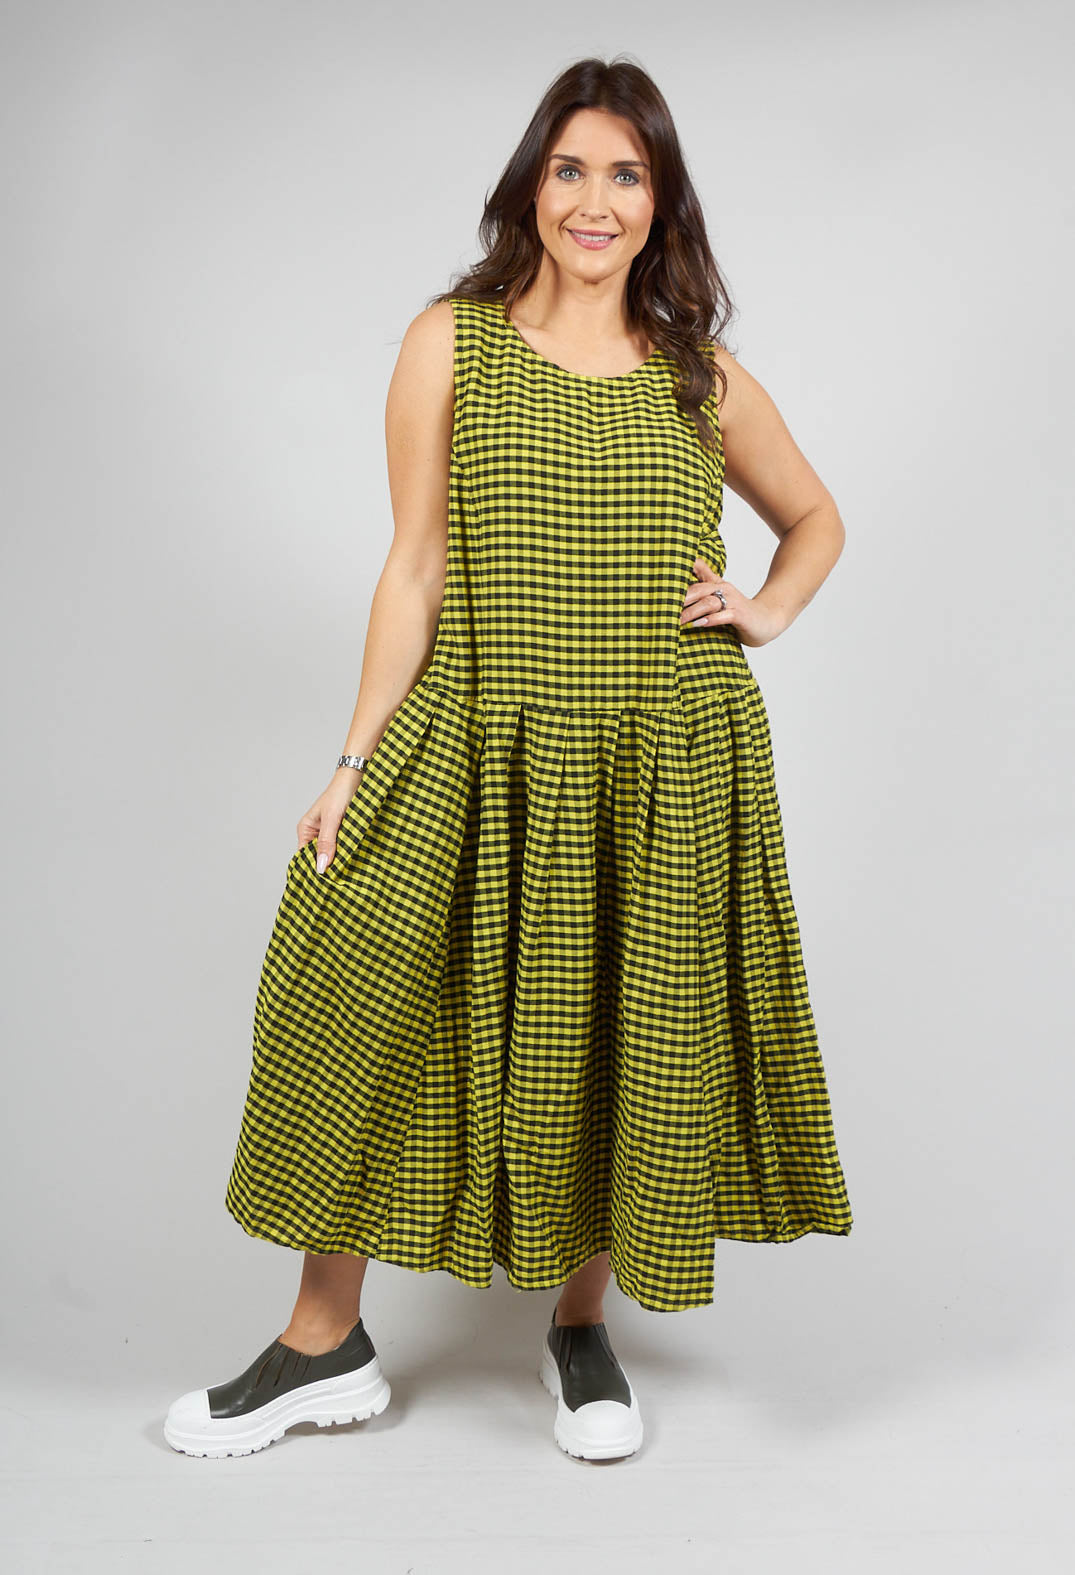 Herschneller Dress in Ingwer Yellow and Black Check